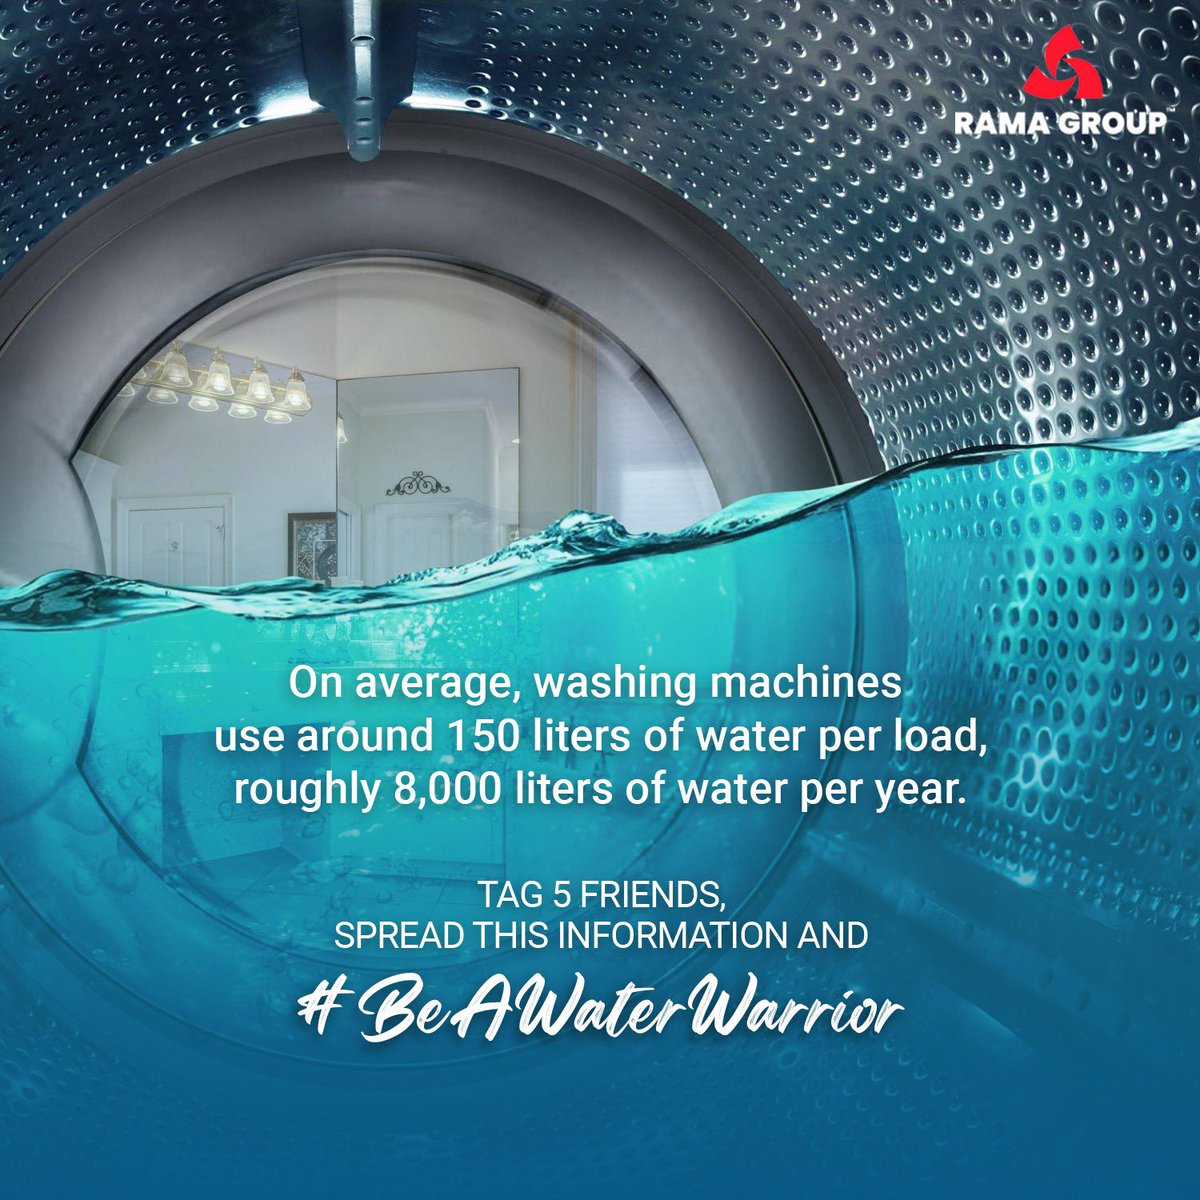 #BeAWaterWarrior Run washing machines and dishwashers only for full loads to optimize water usage per wash. This is an important information and we want you to spread this amongst as many people as possible. Tag 5 friends, spread this information and win Amazon Voucher.